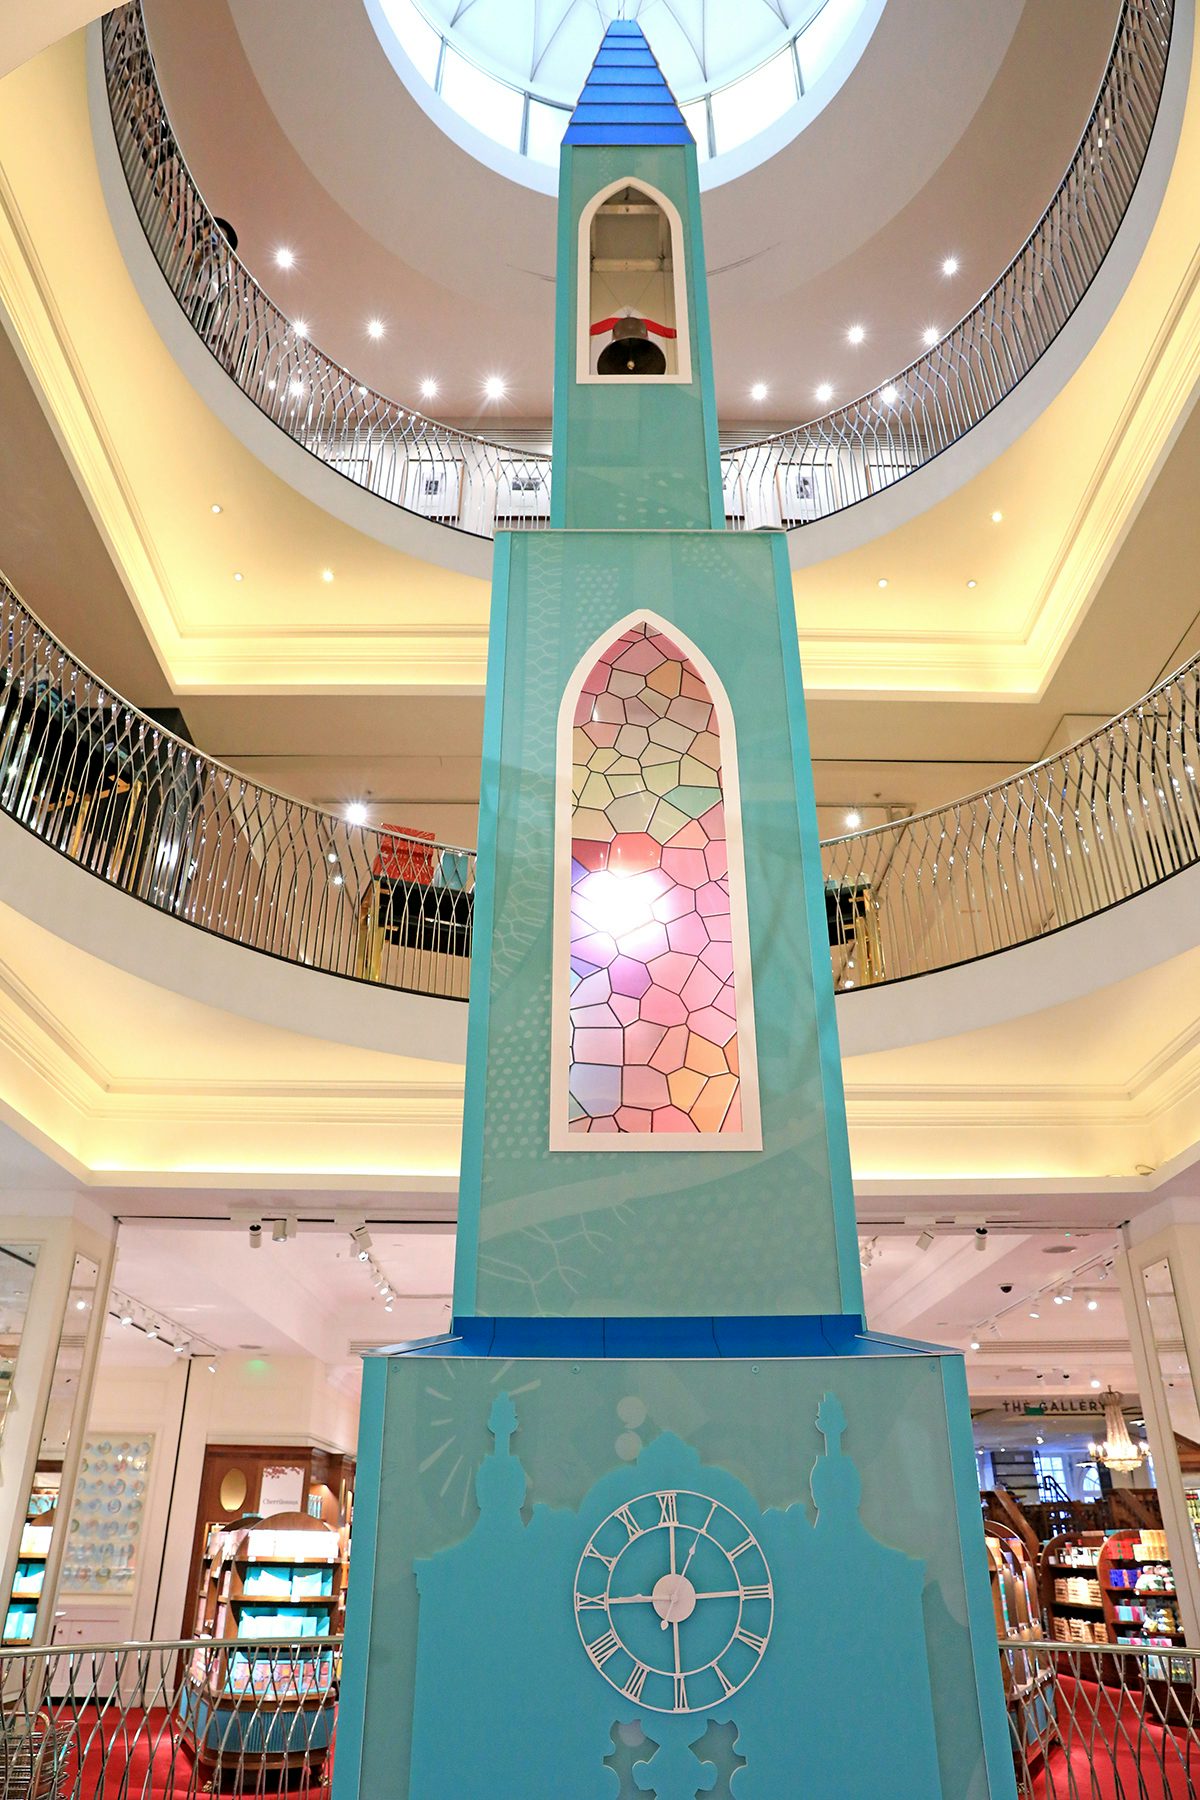 An image of the Chapel of Love at Fortnum & Mason which is hosting wedding ceremonies